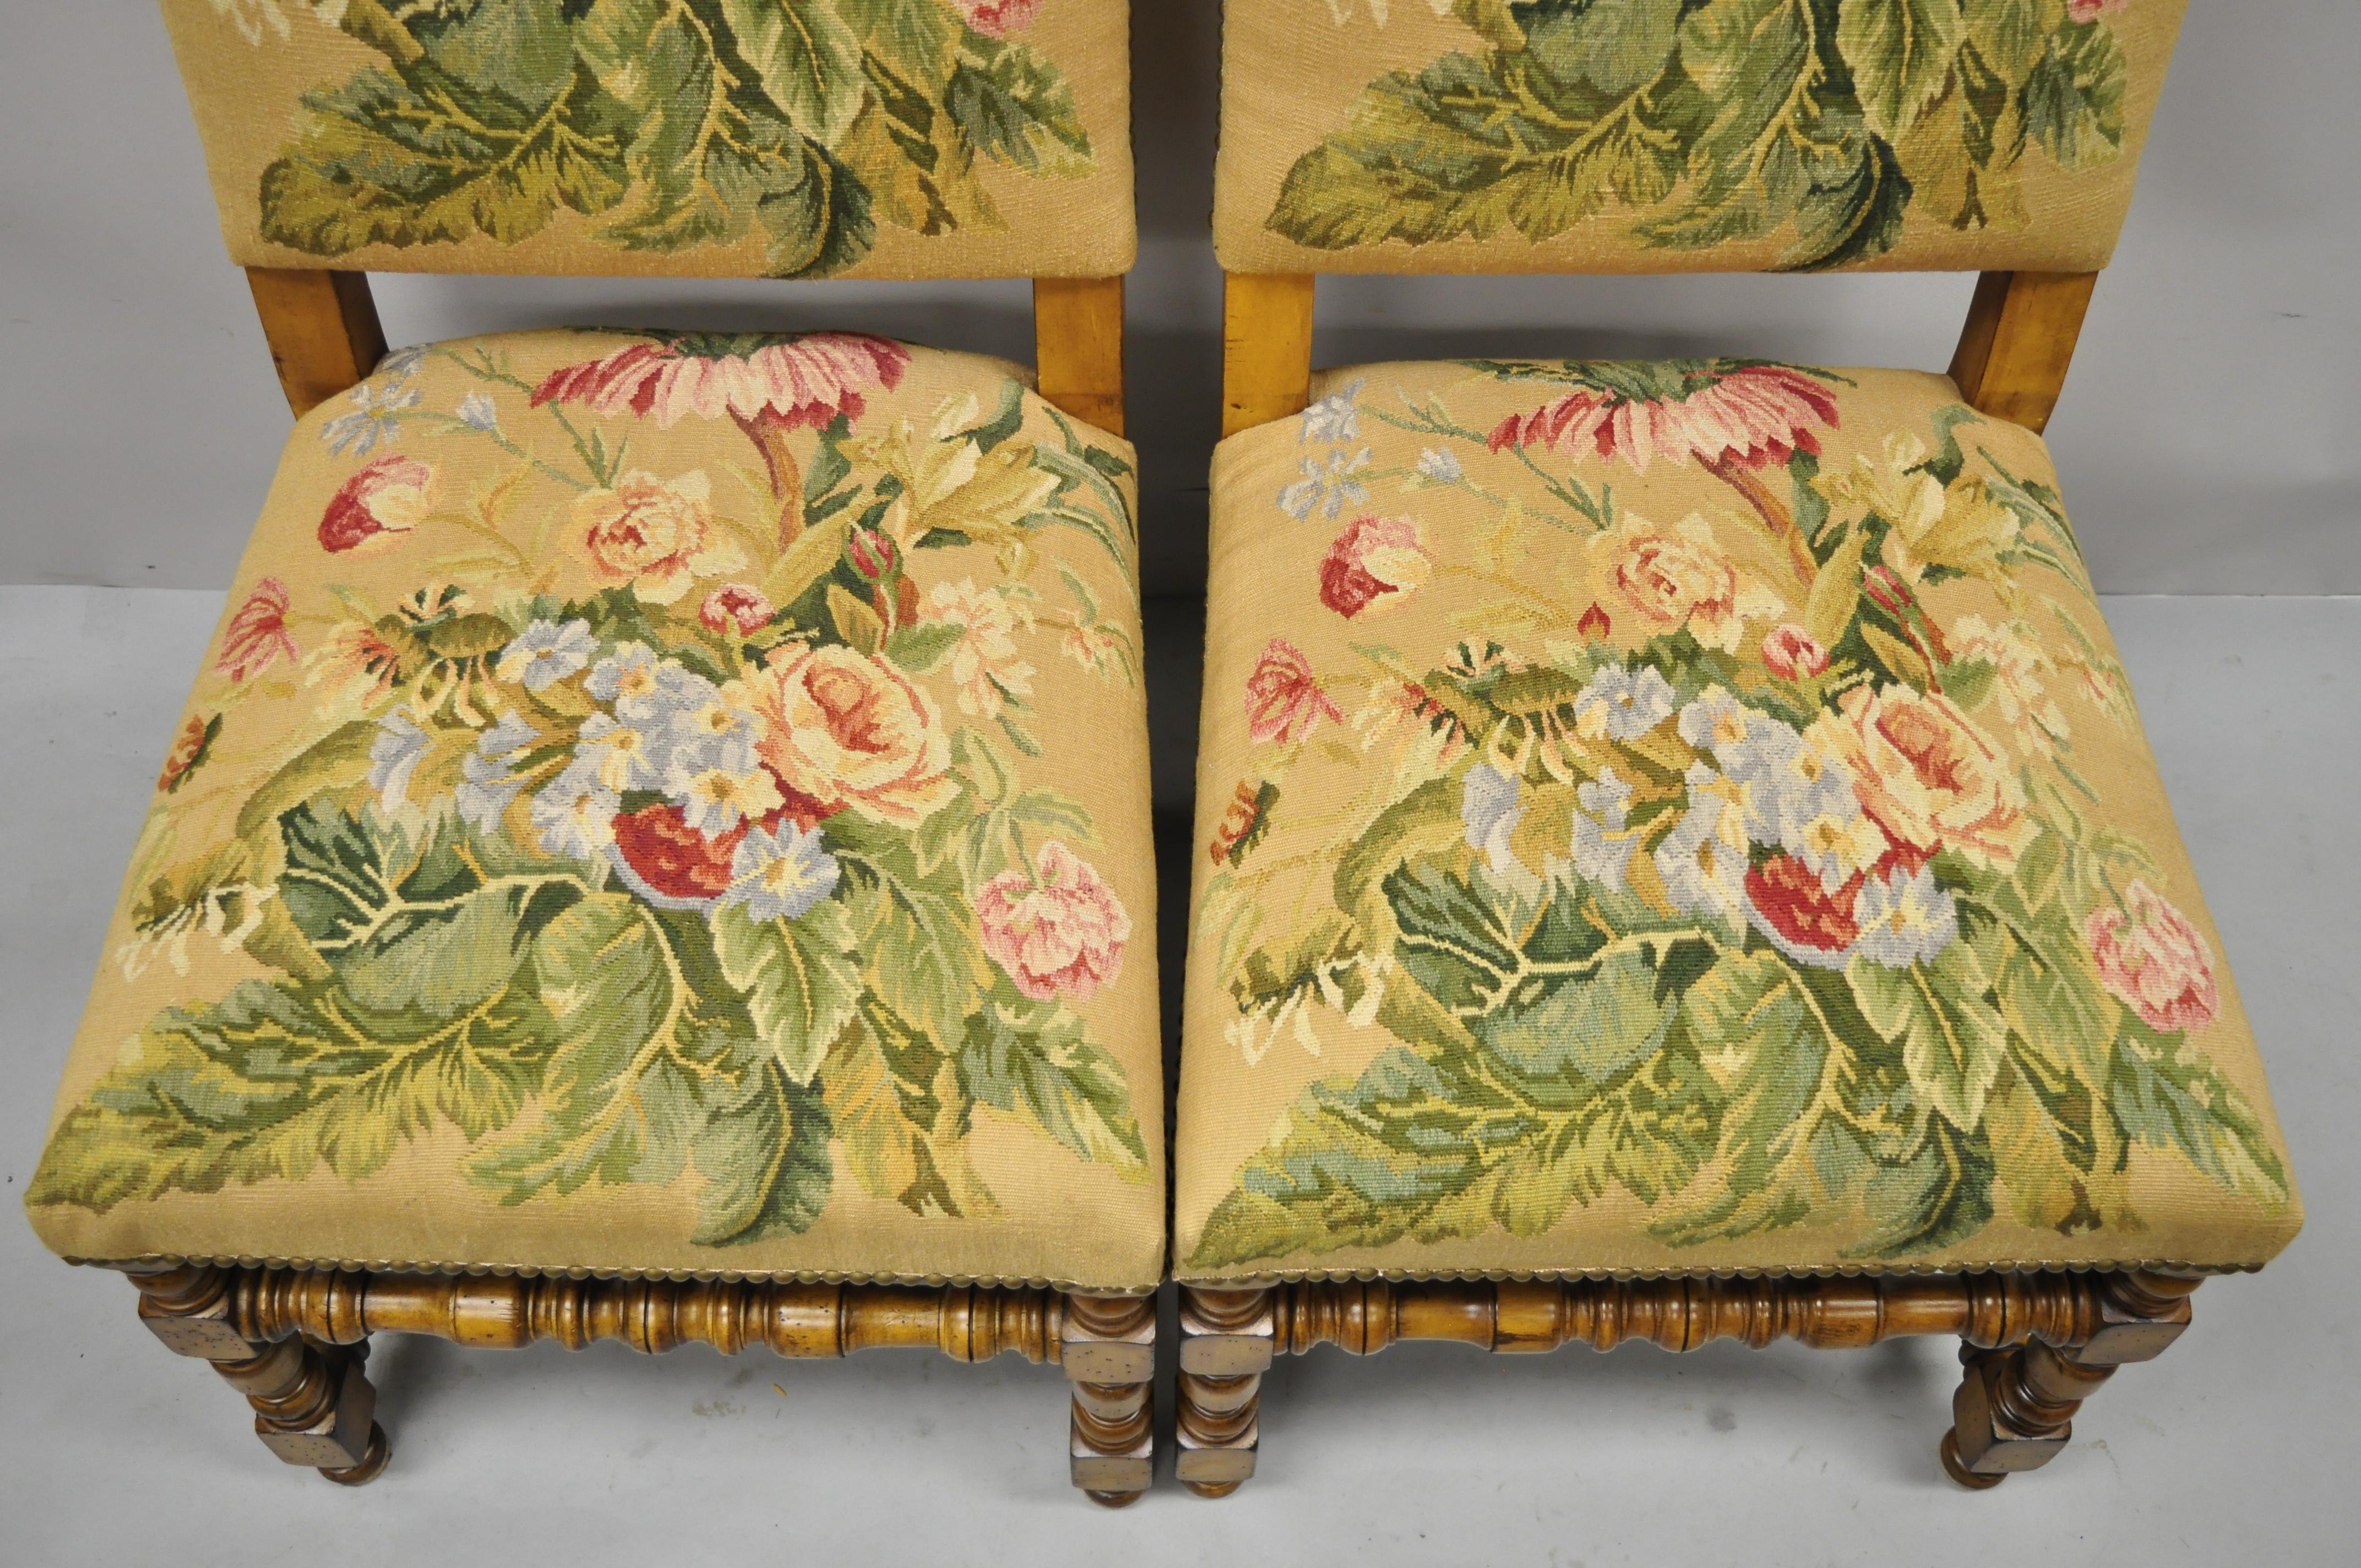 20th Century Antique English Jacobean Floral Needlepoint Tall Dining Side Chairs, a Pair